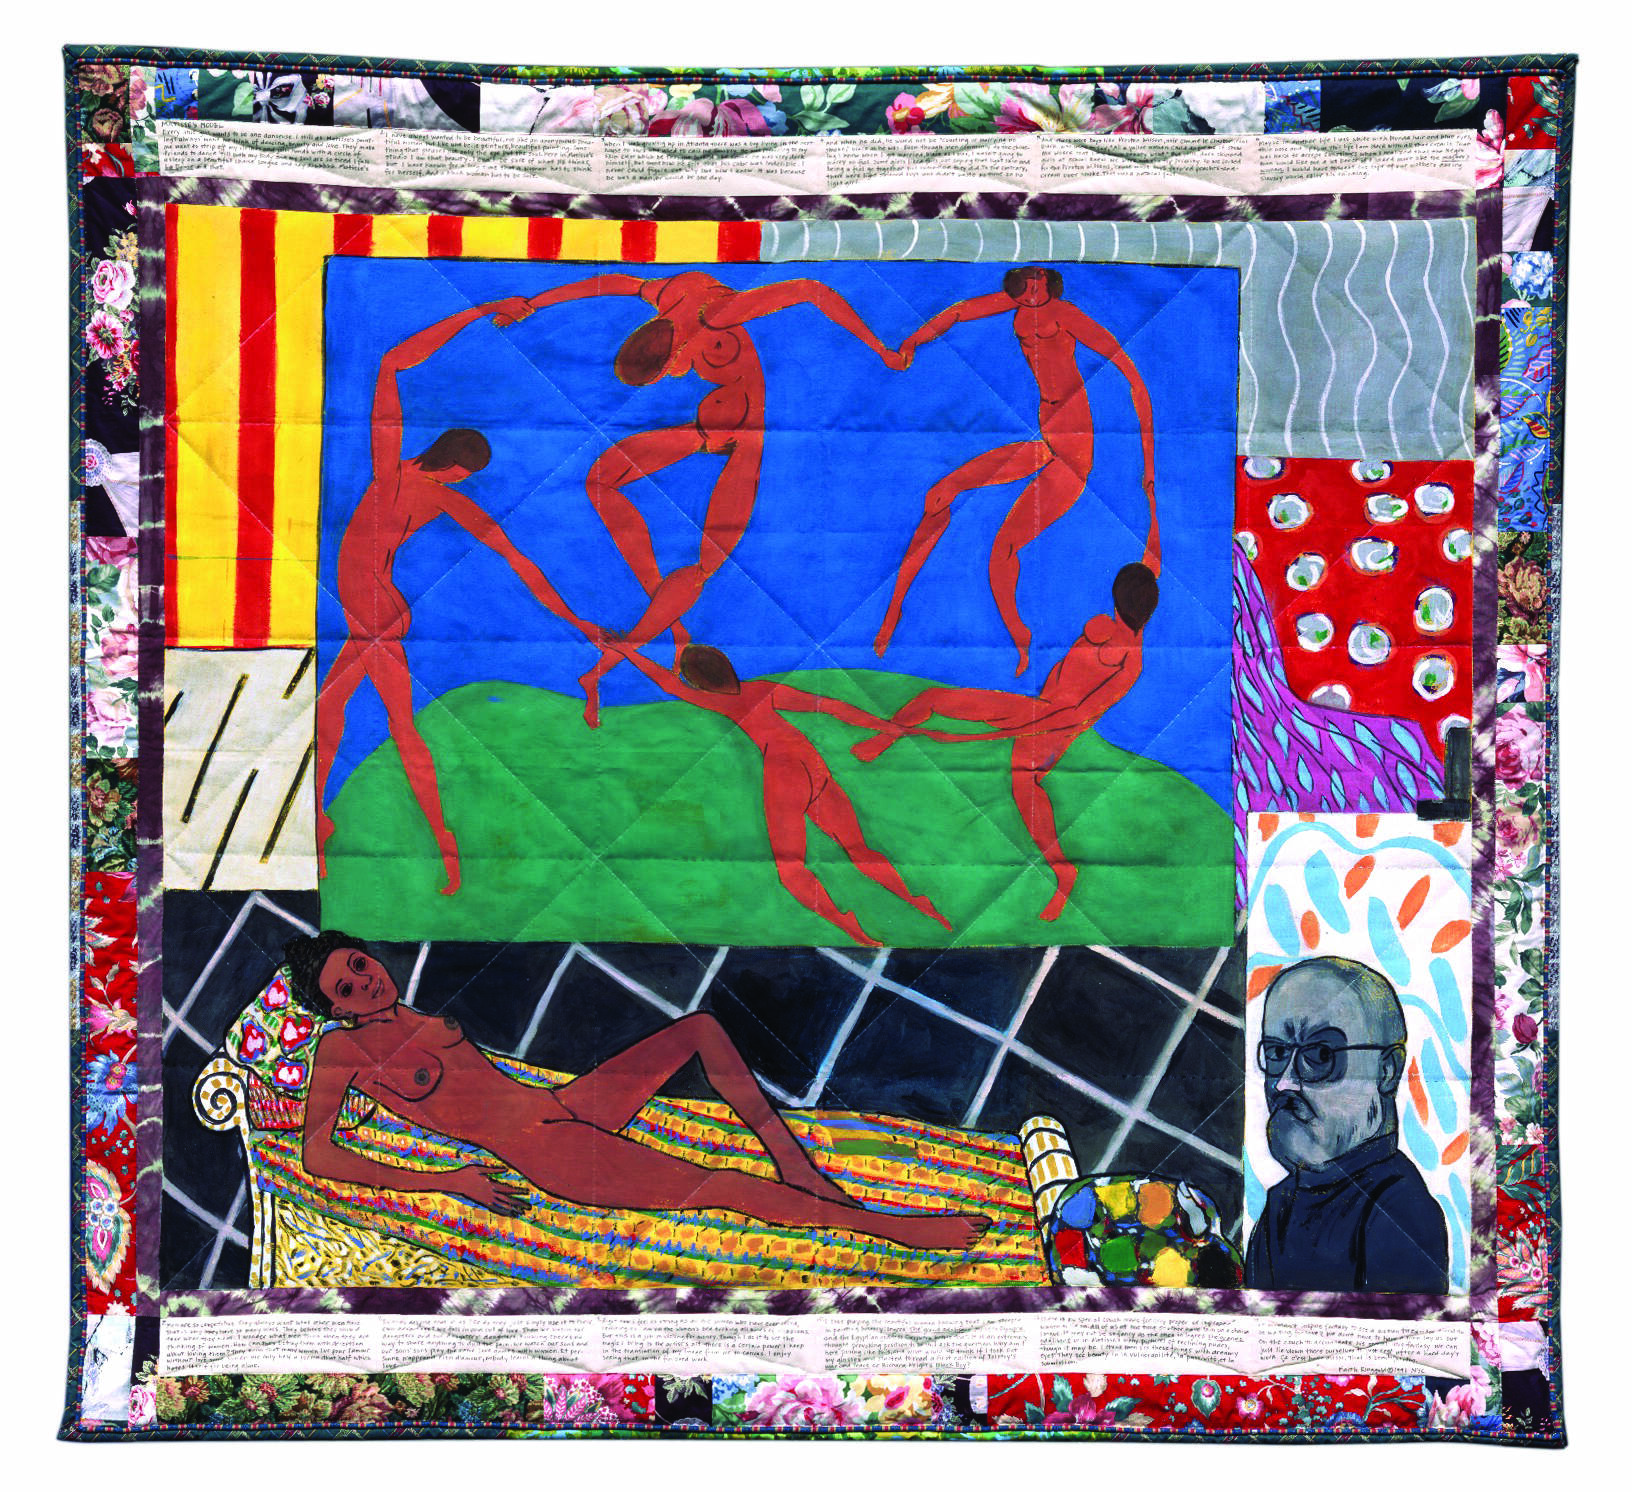 The French Collection and the liberty of Faith Ringgold